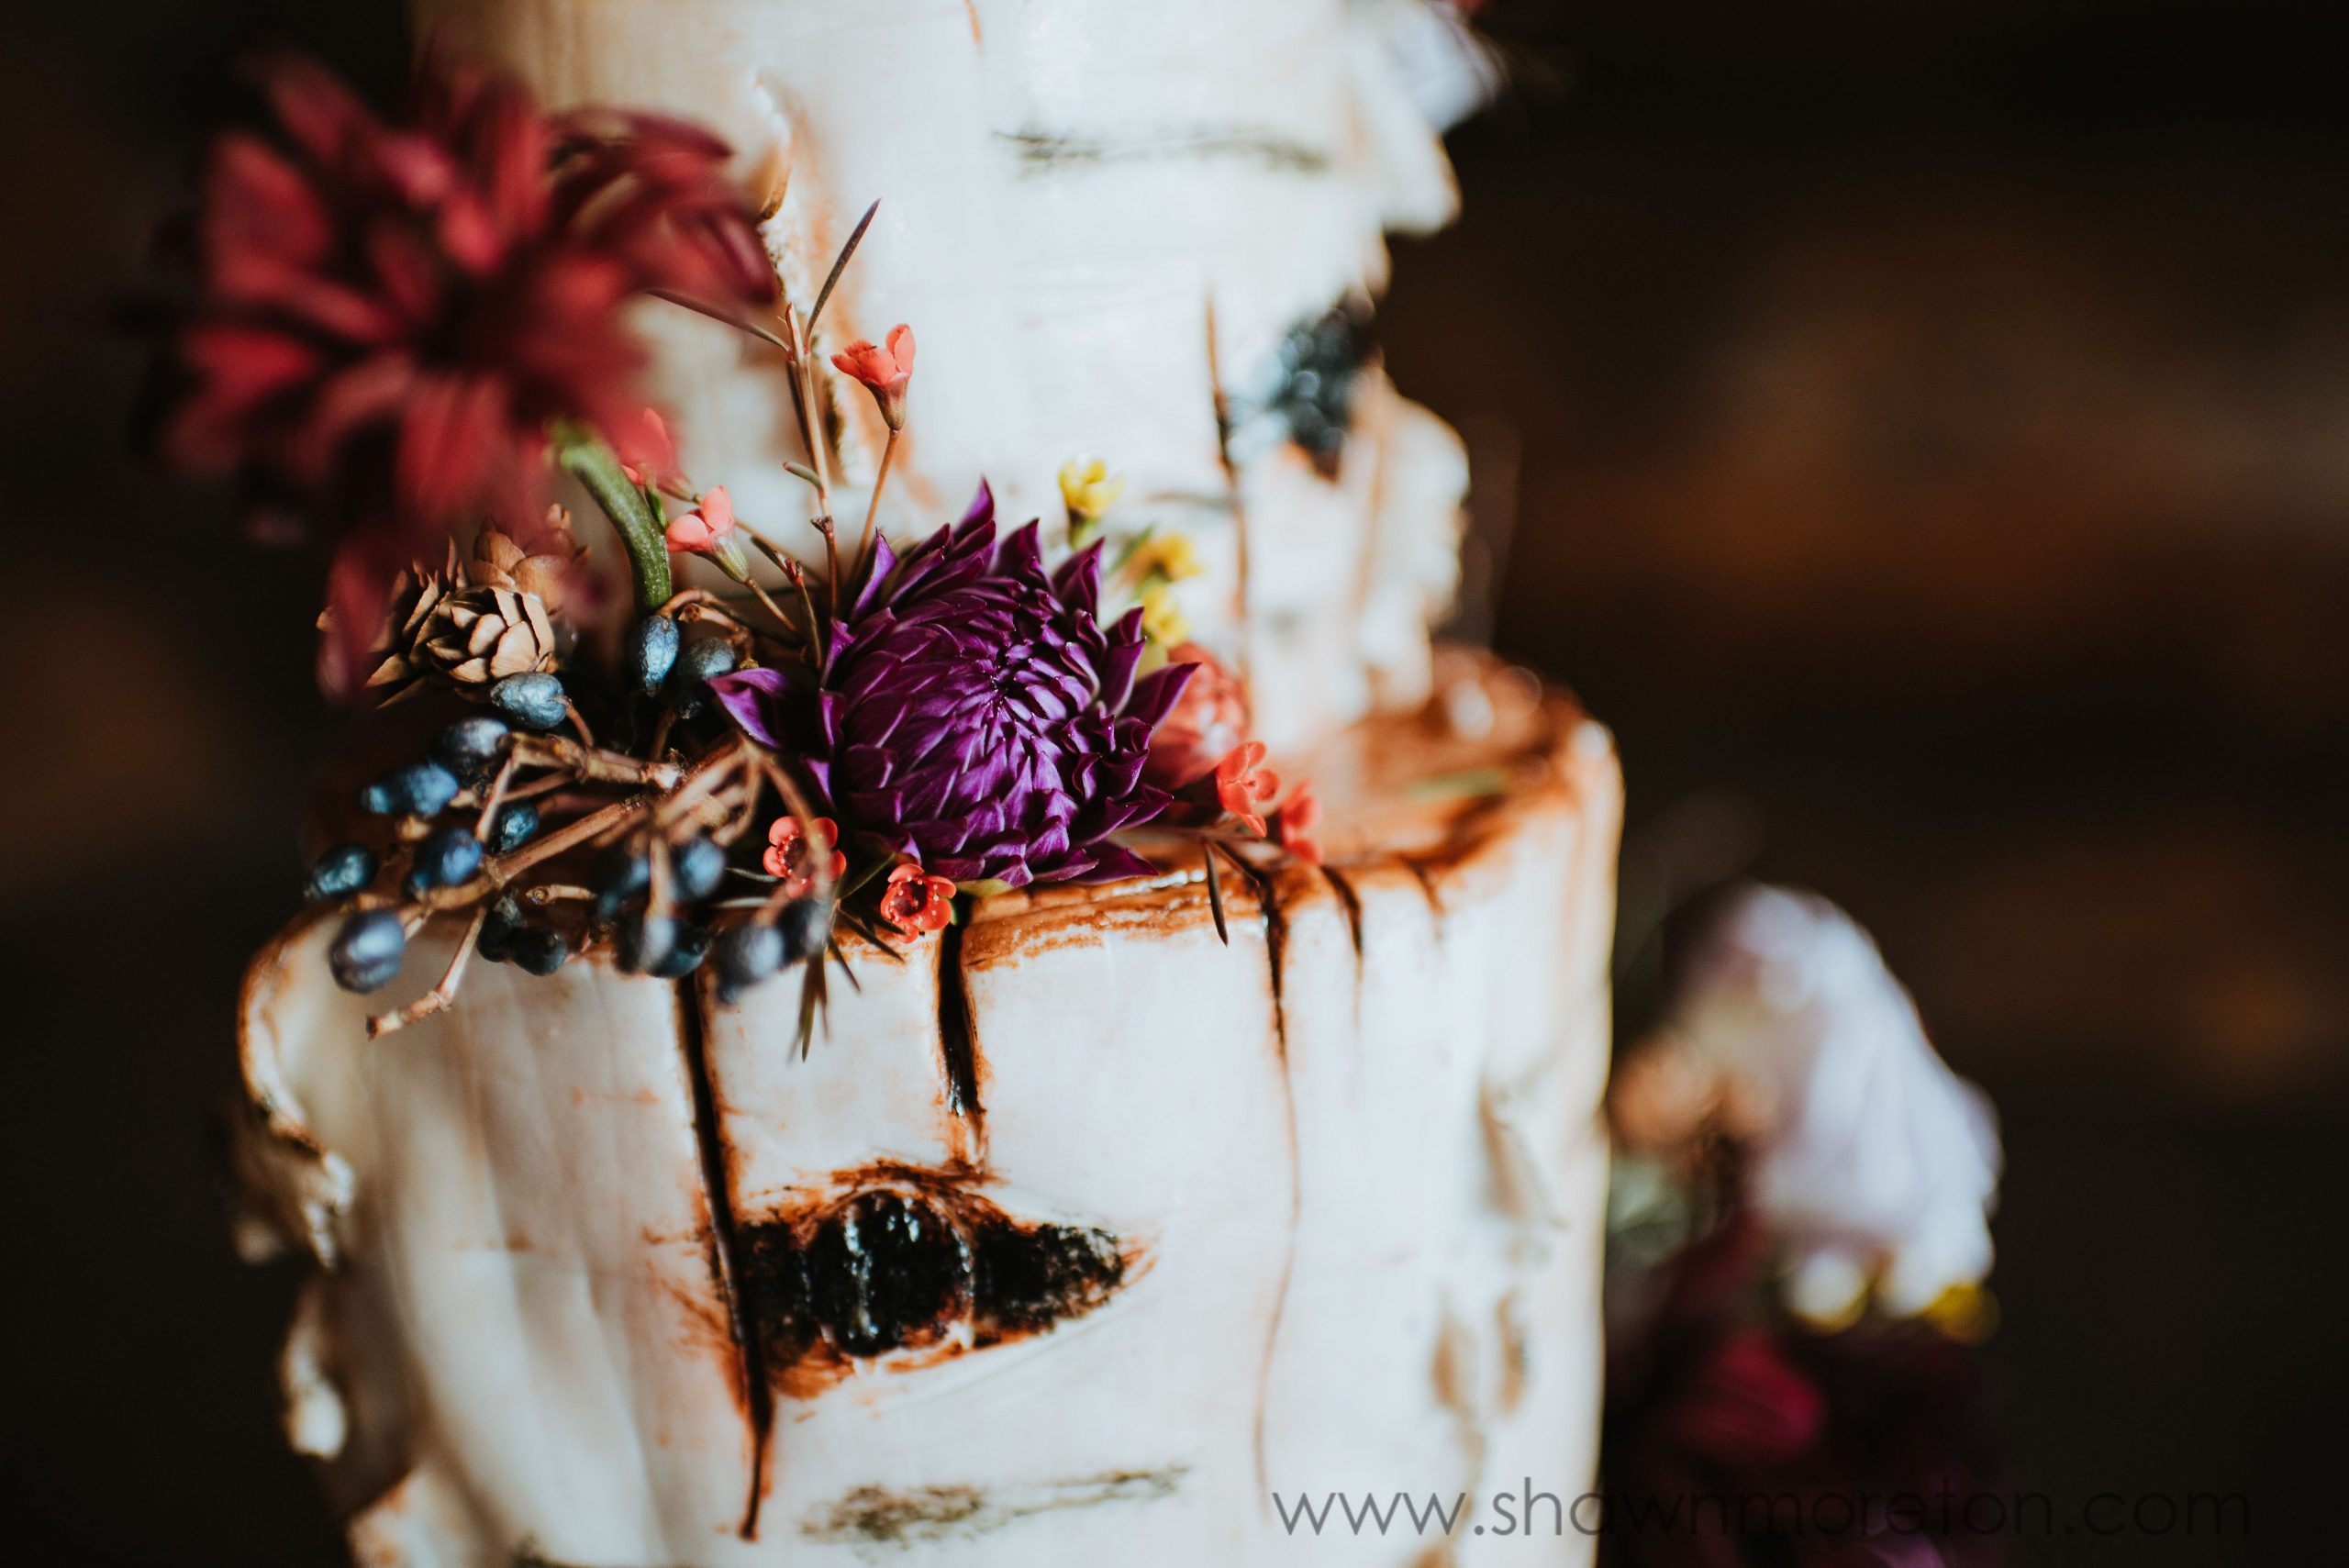 An off-white cake decorated with red and purple flowers.